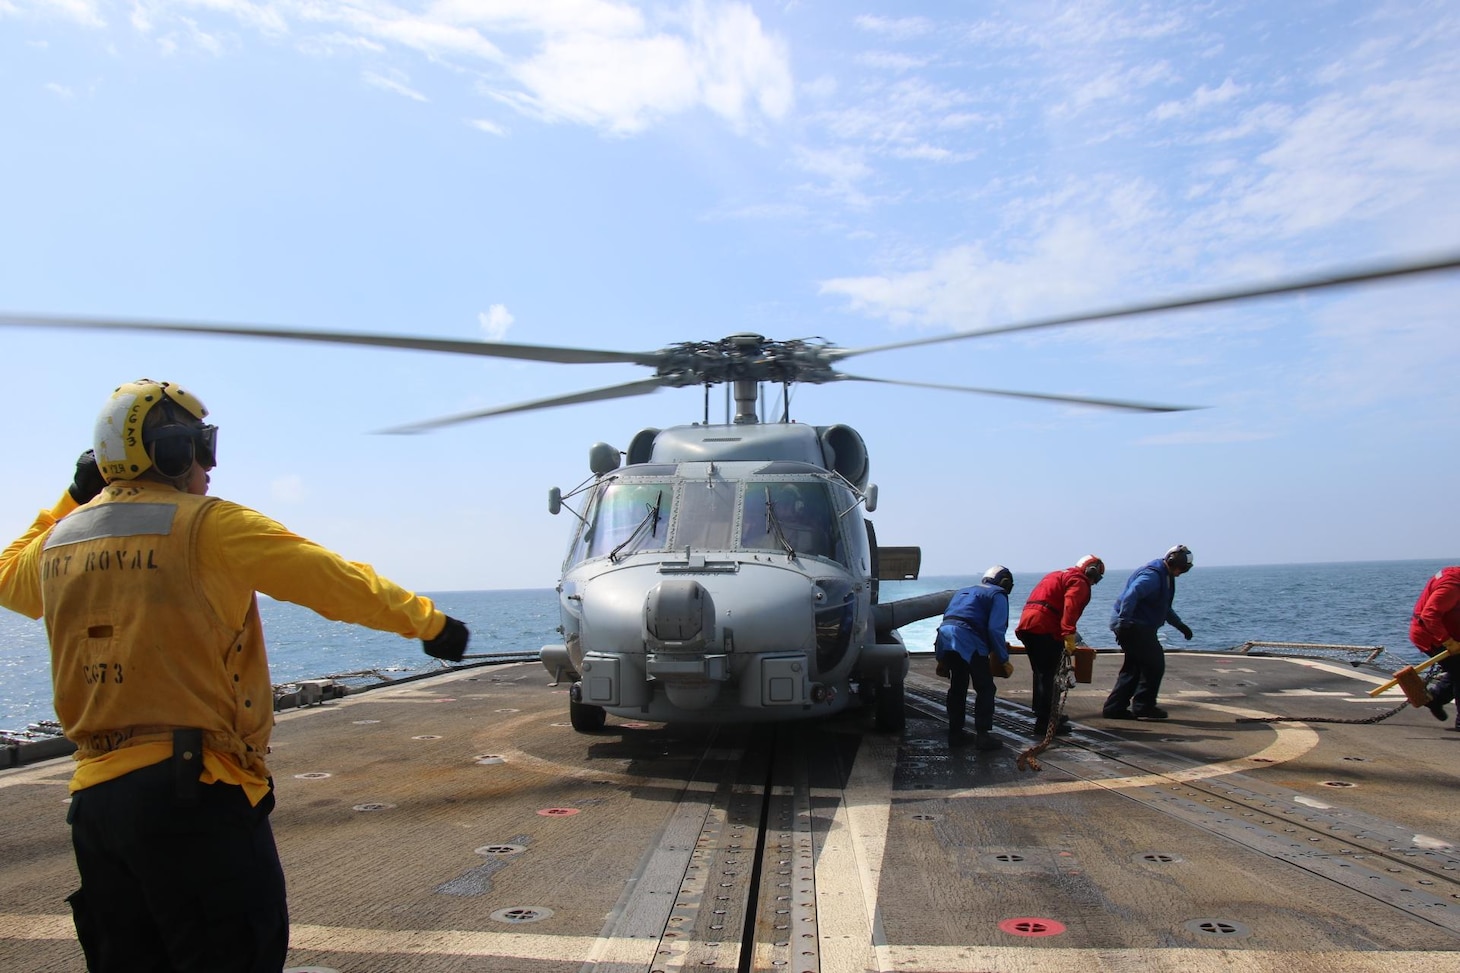 220510-N-NO824-1022 TAIWAN STRAIT (May 10, 2022) Sailors retrieve chock and chains from an MH-60R Sea Hawk helicopter, attached to the “Easyriders” of Helicopter Maritime Strike Squadron (HSM) 37, prior to takeoff on the flight deck of the Ticonderoga-class guided-missile cruiser USS Port Royal (CG 73) as the ship conducts a routine Taiwan Strait transit May 10. Port Royal is forward-deployed to the 7th Fleet area of operations in support of a free and open Indo-Pacific. (U.S. Navy photo by Ensign Jessika Stanback)